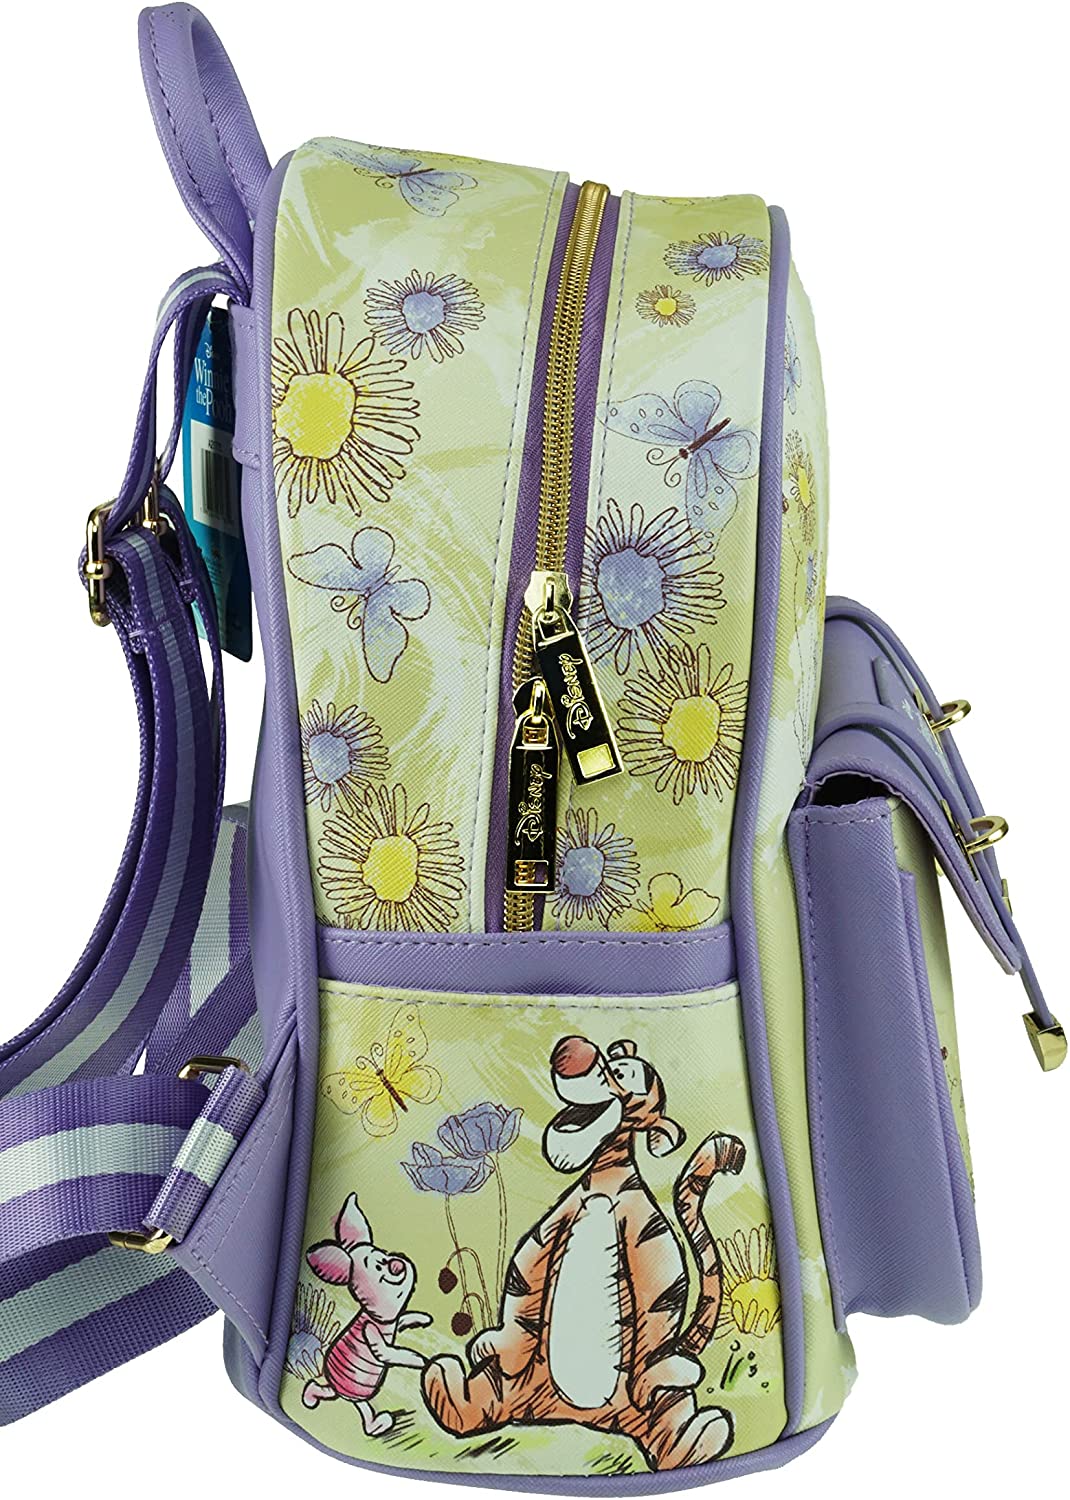 Winnie The Pooh - Eeyore 11" Faux Leather Mini Backpack - A21775 - GTE Zone